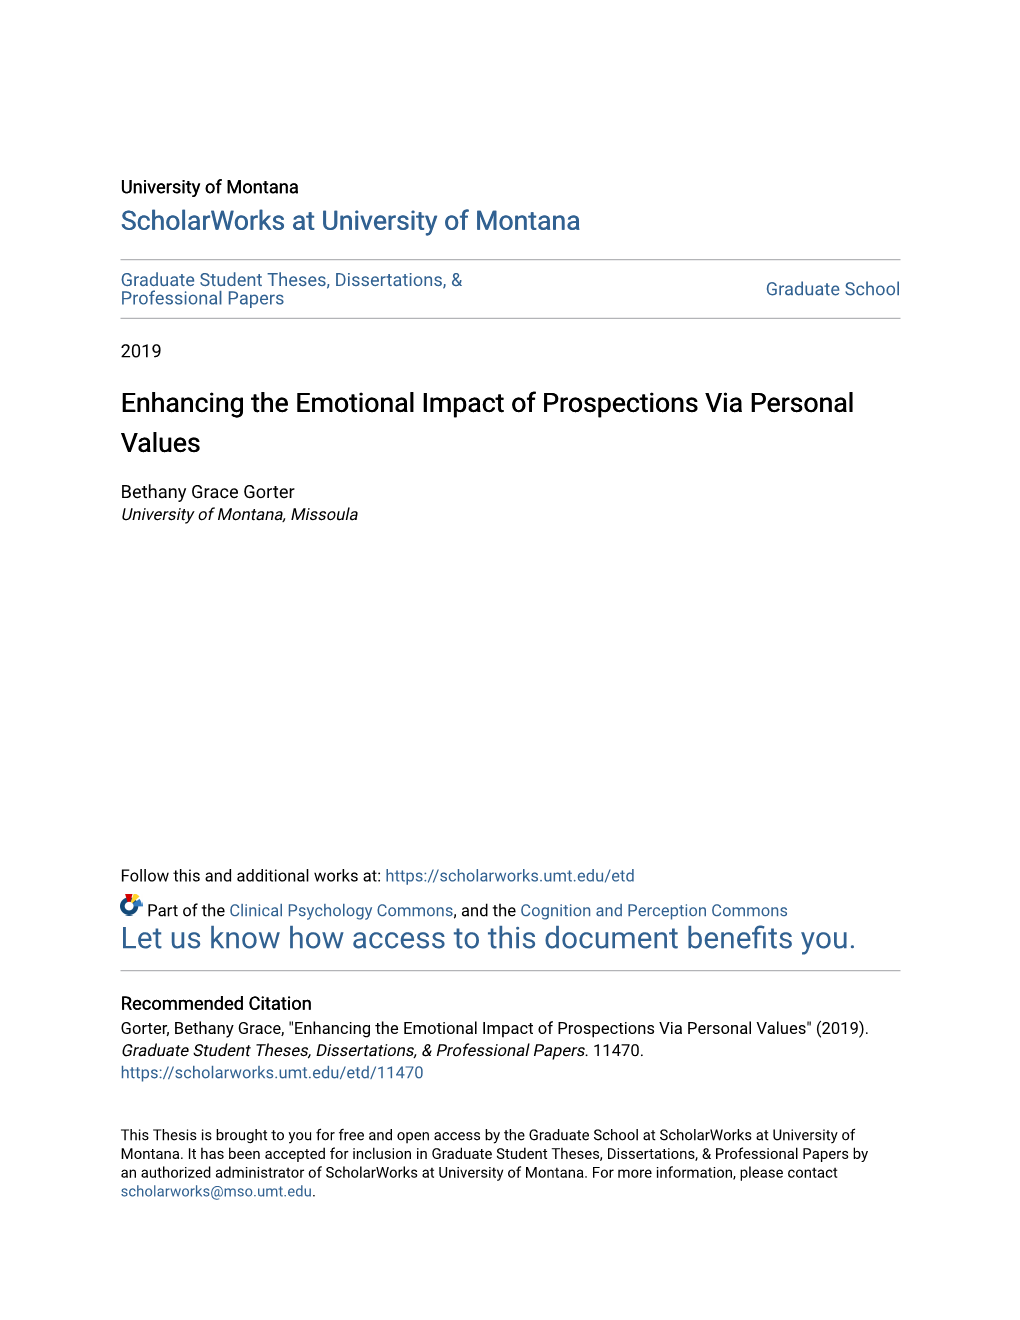 Enhancing the Emotional Impact of Prospections Via Personal Values